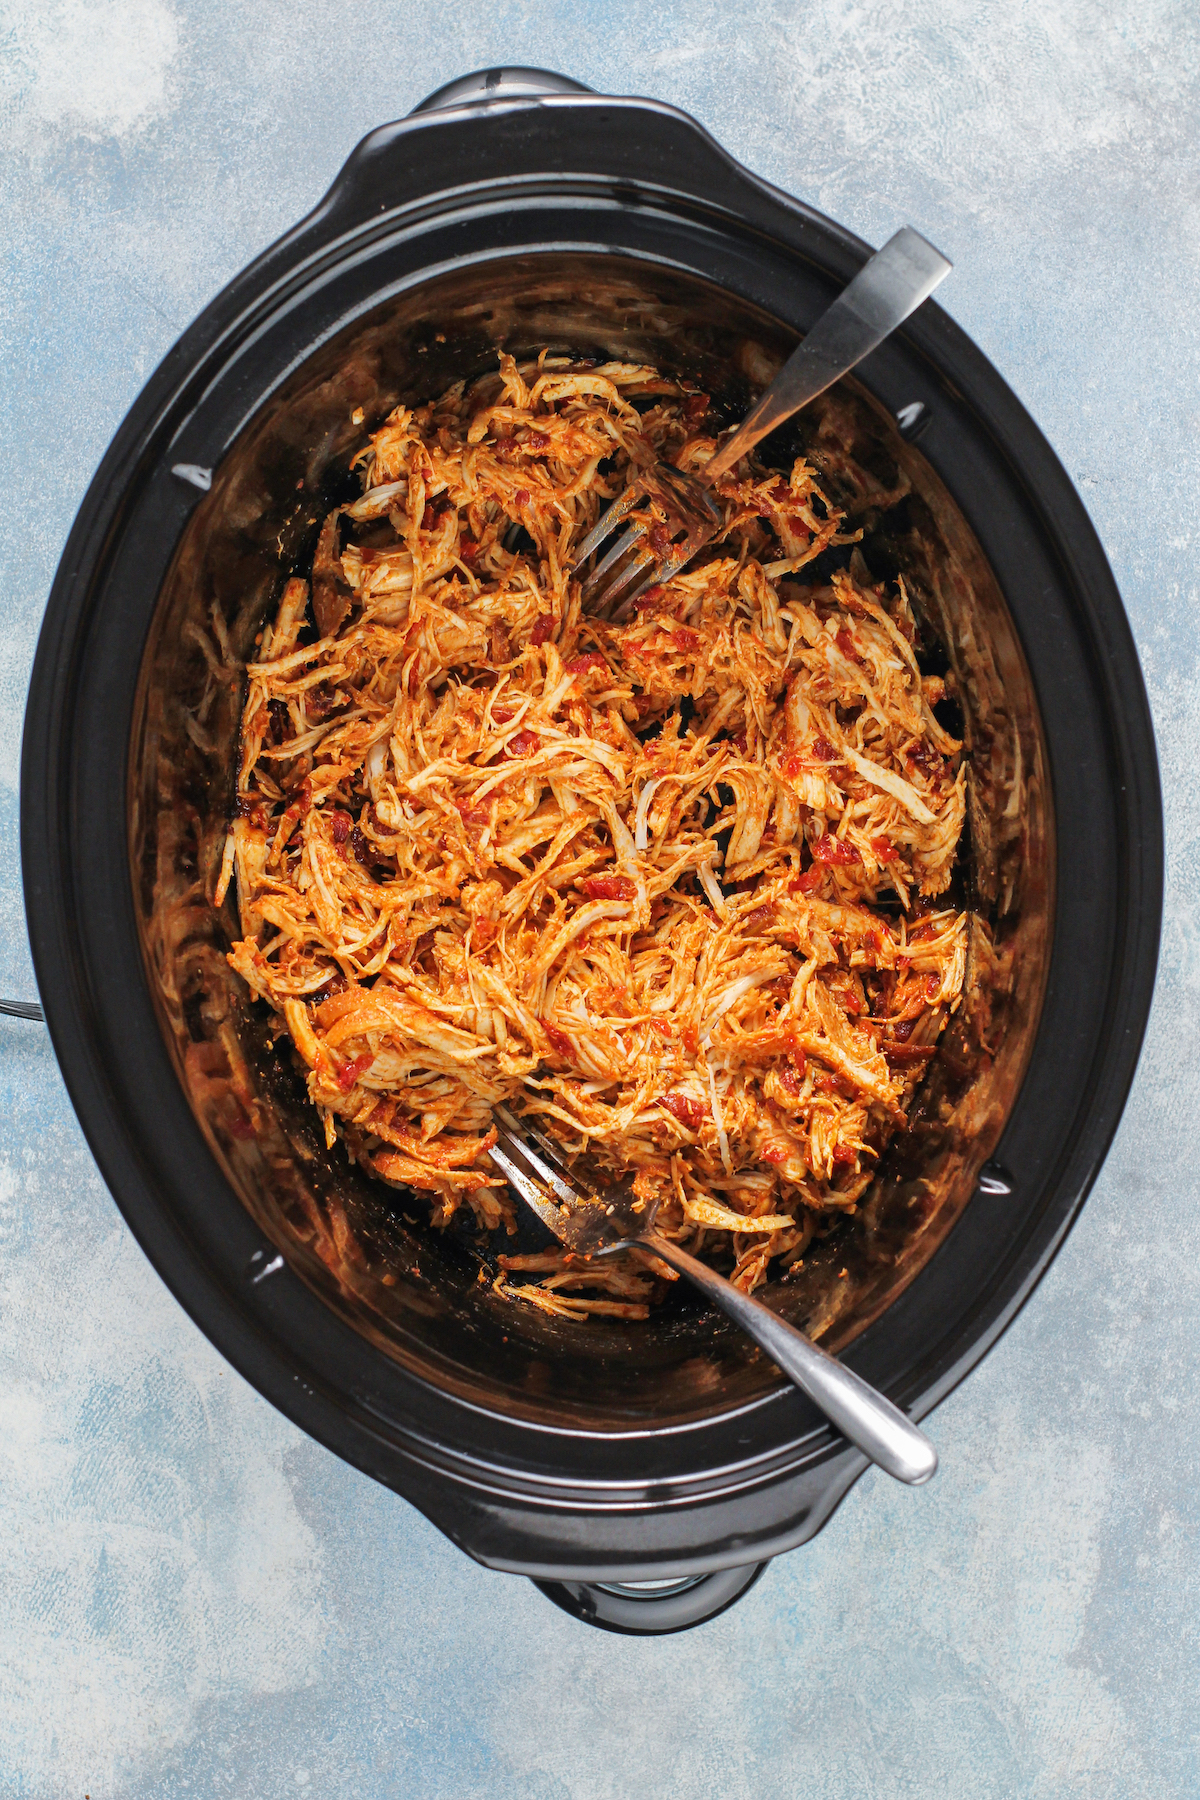 A slow cooker insert filled with cooked, seasoned, shredded chicken.